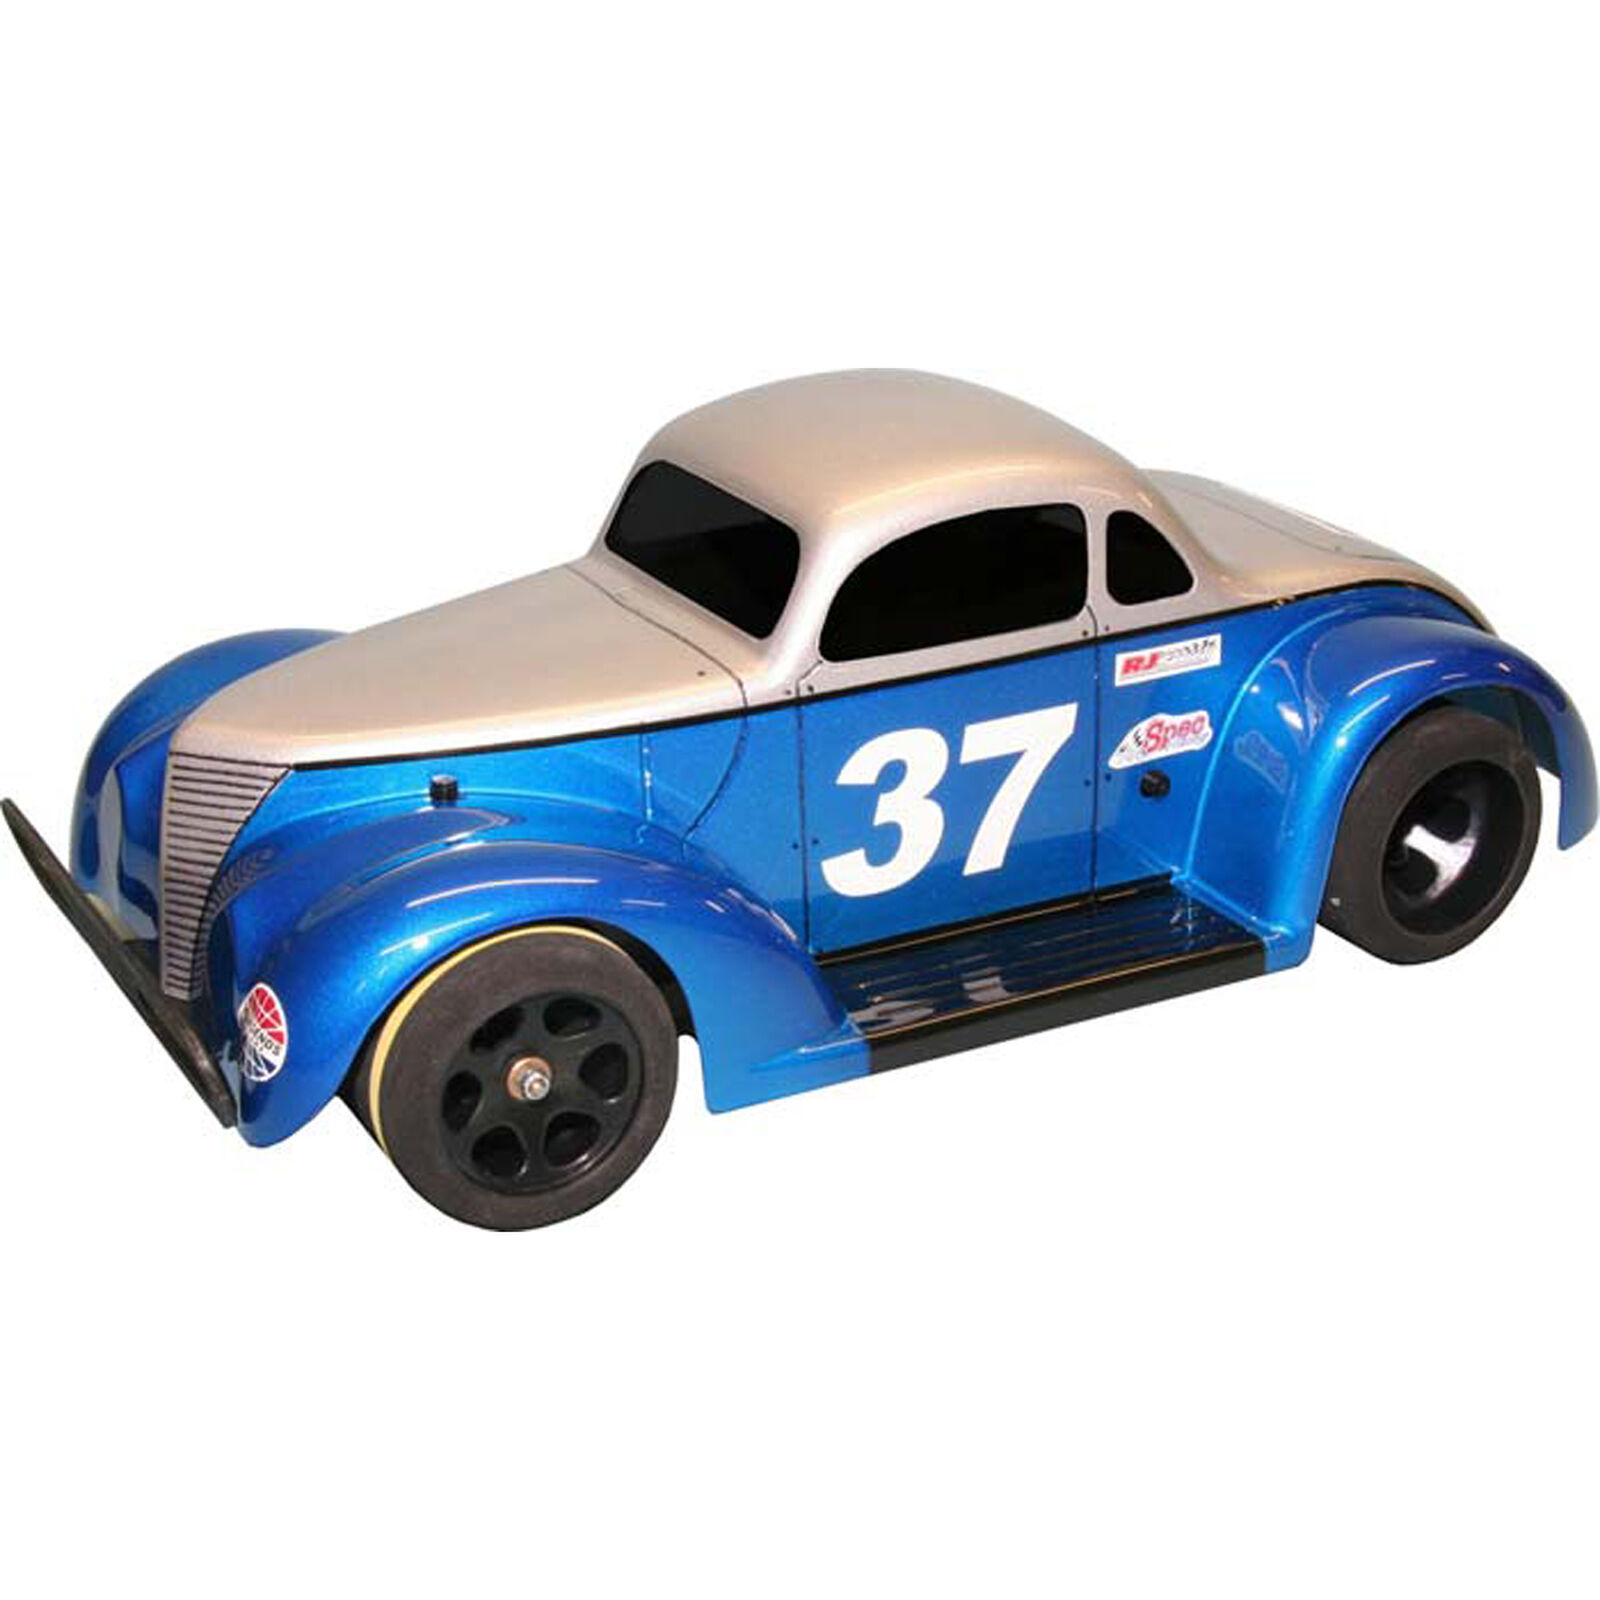 R/C Legends 37F Coupe Clear Body